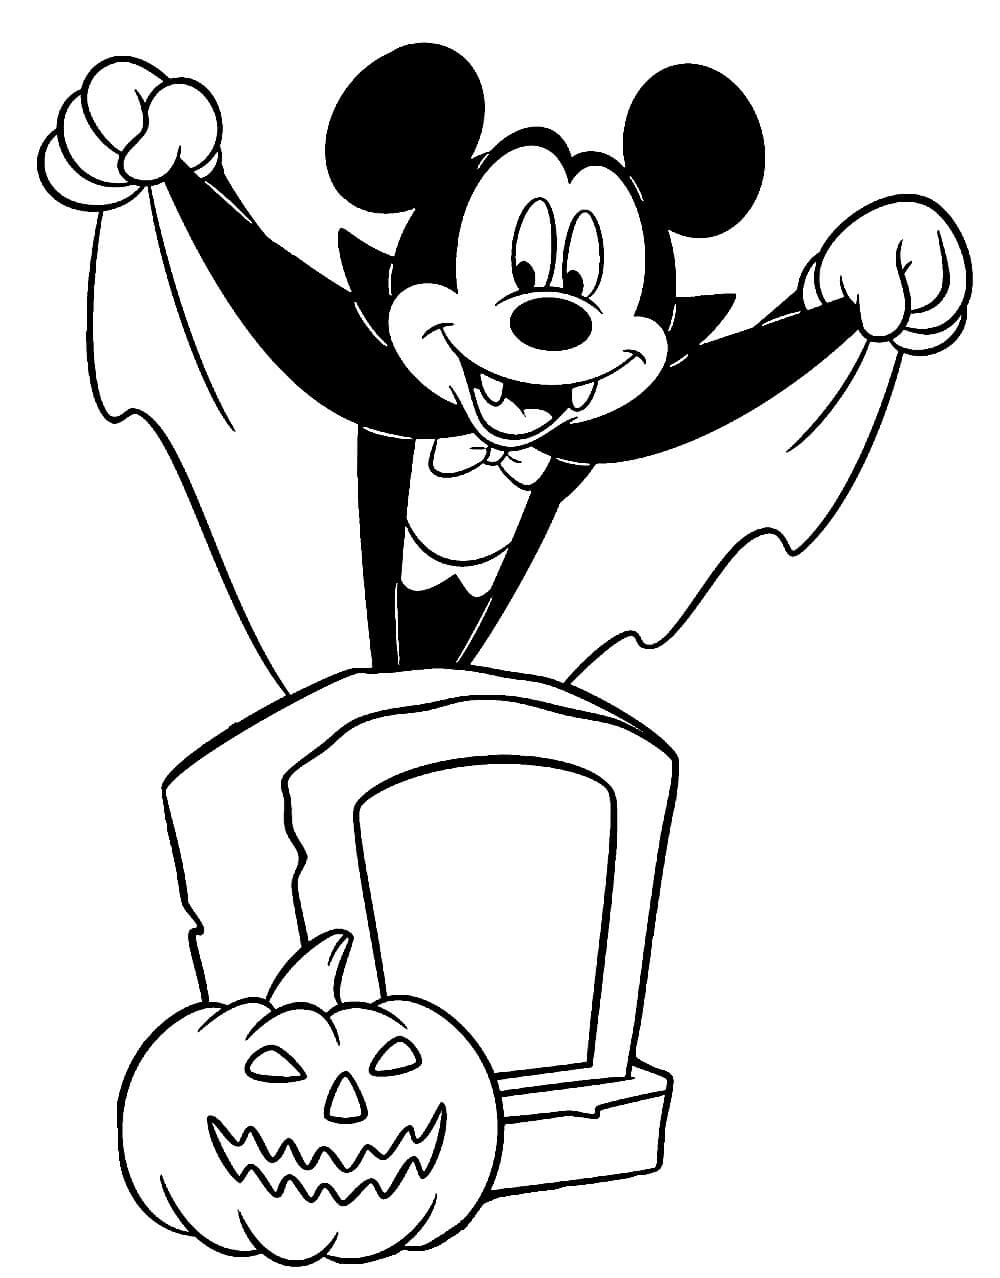 Mickey Mouse of Dracula